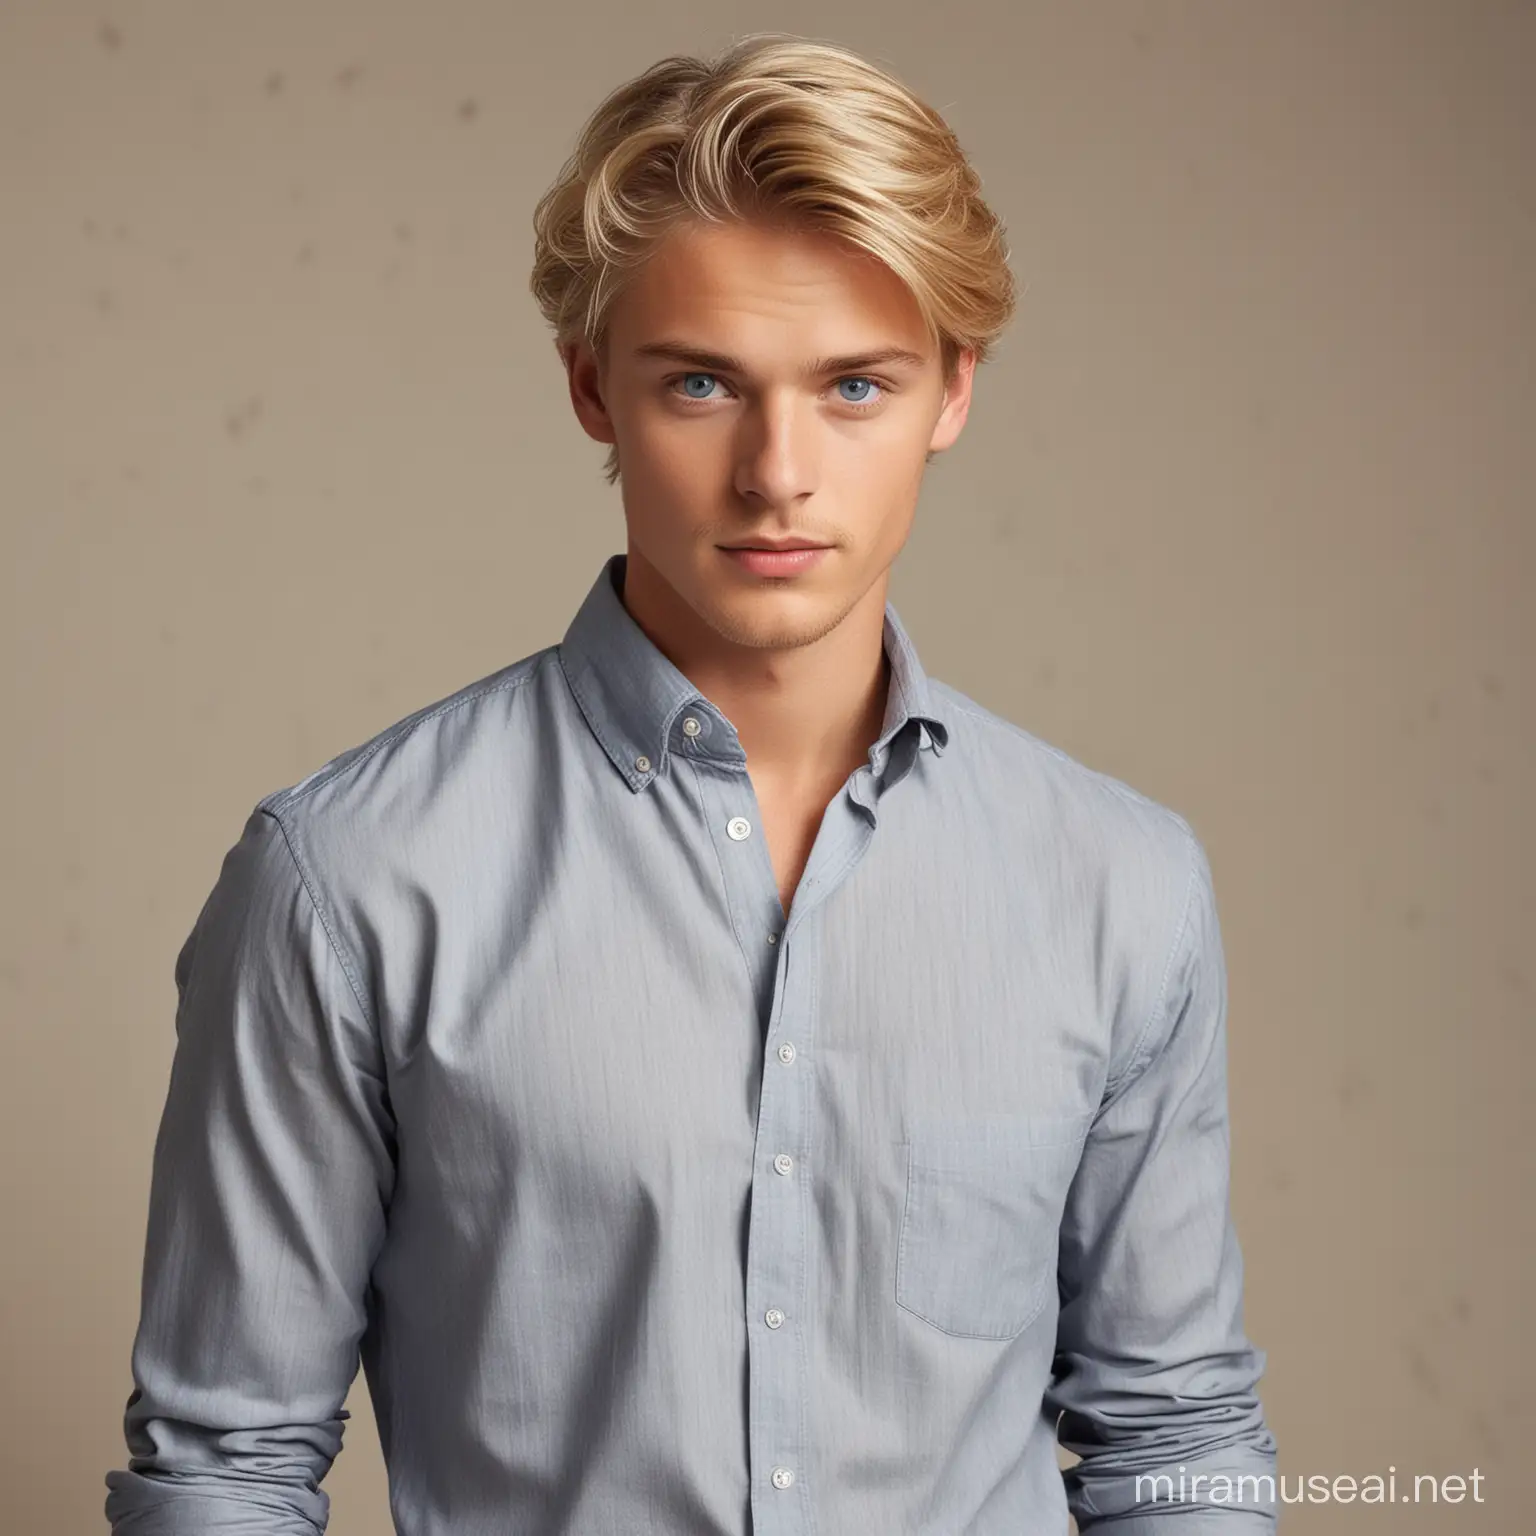 Handsome Young Man in Casual Attire with Blond Hair and Blue Eyes